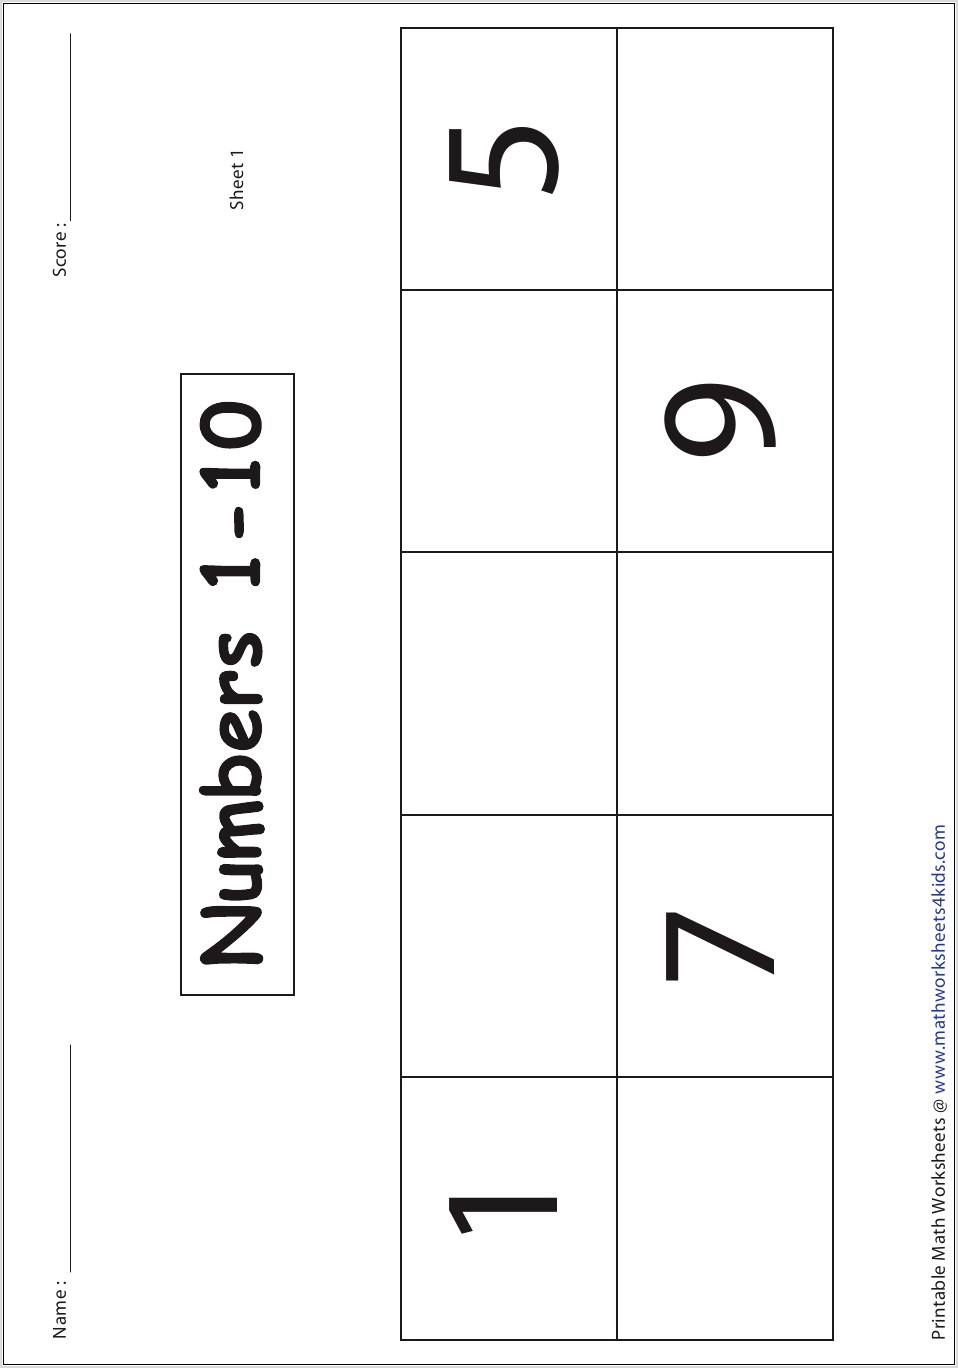 Worksheet With Numbers 1 10